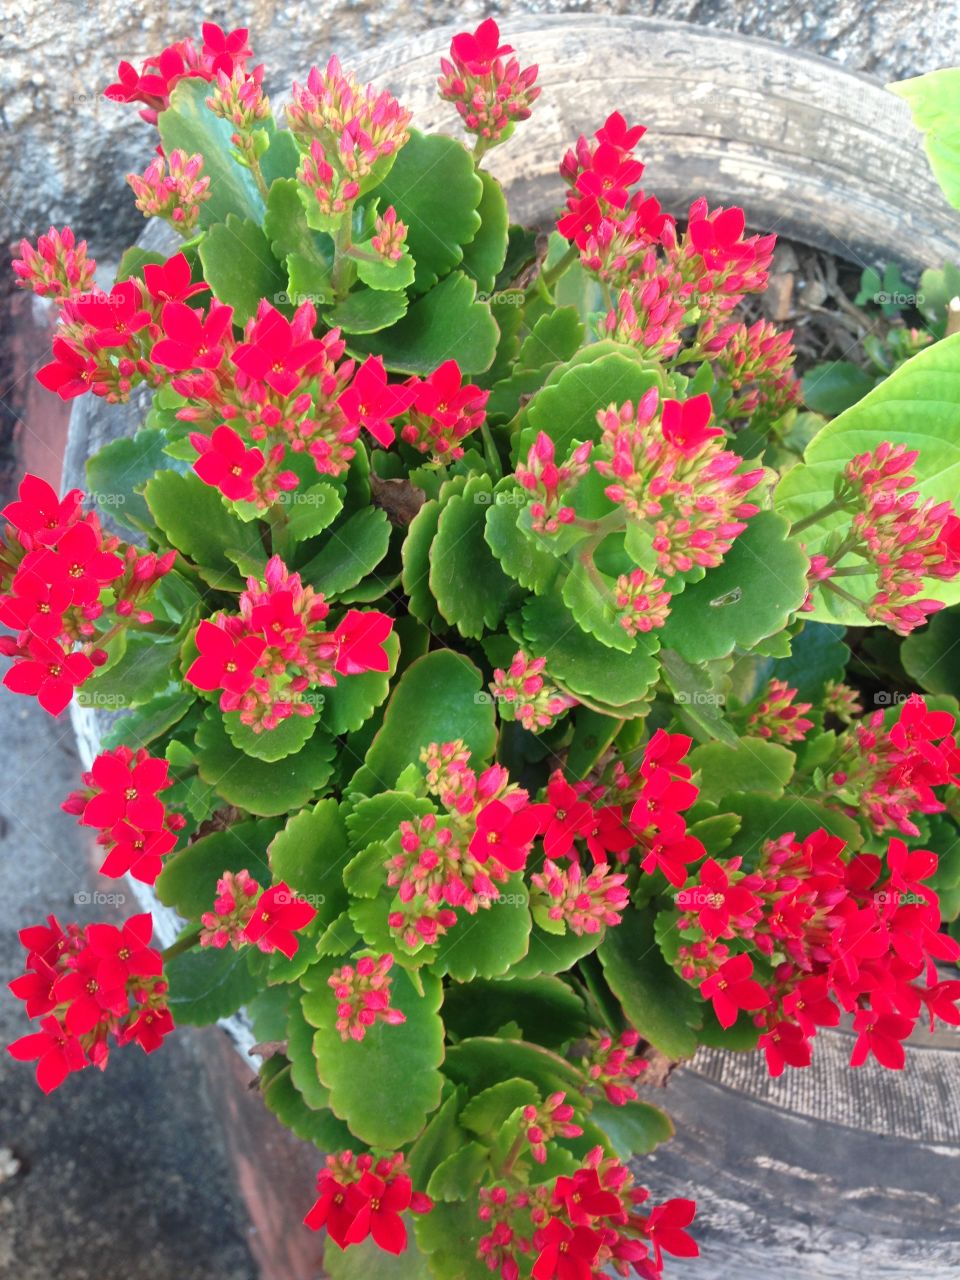 Look how beautiful this red flowers are,they are so kind and sweet,it's beautiful to see the green and the red together! 